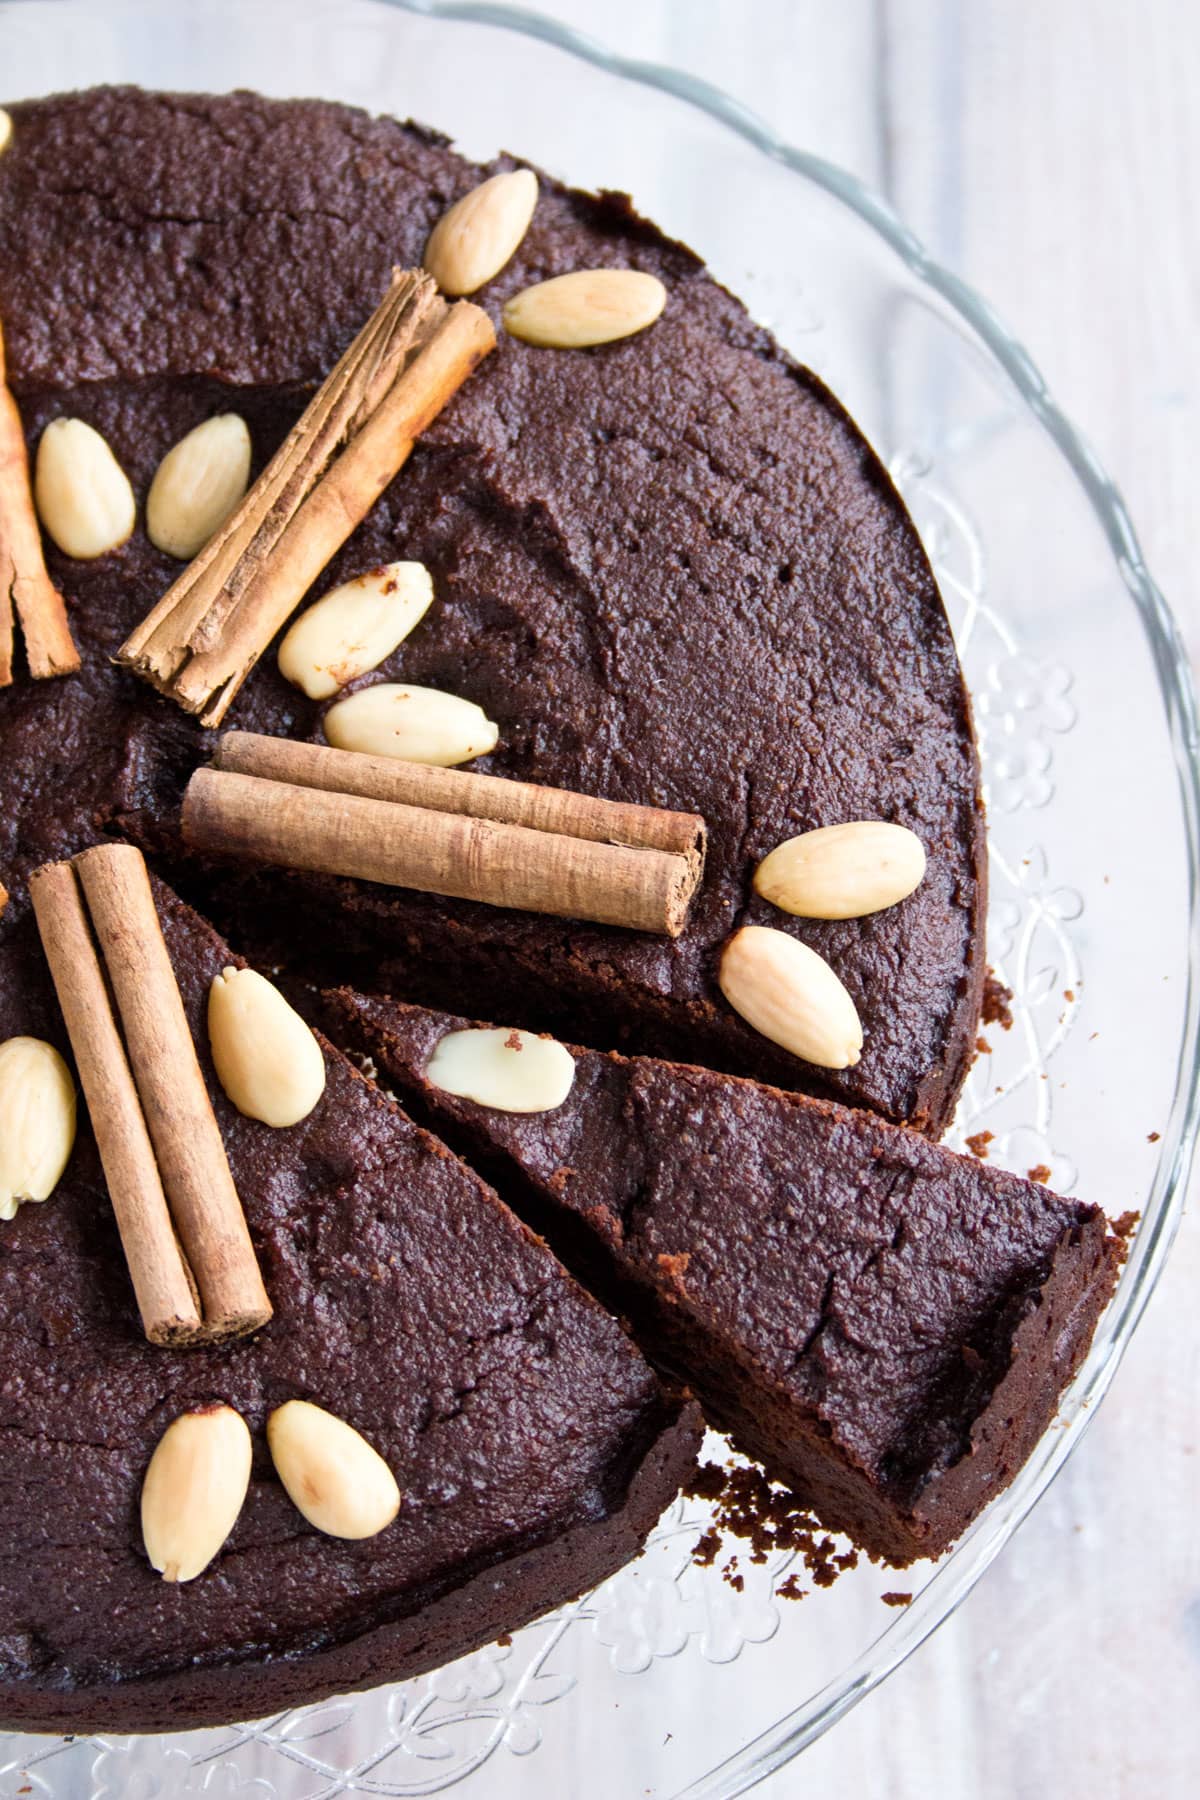 A chocolate cake decorated with almonds and cinnamon sticks.